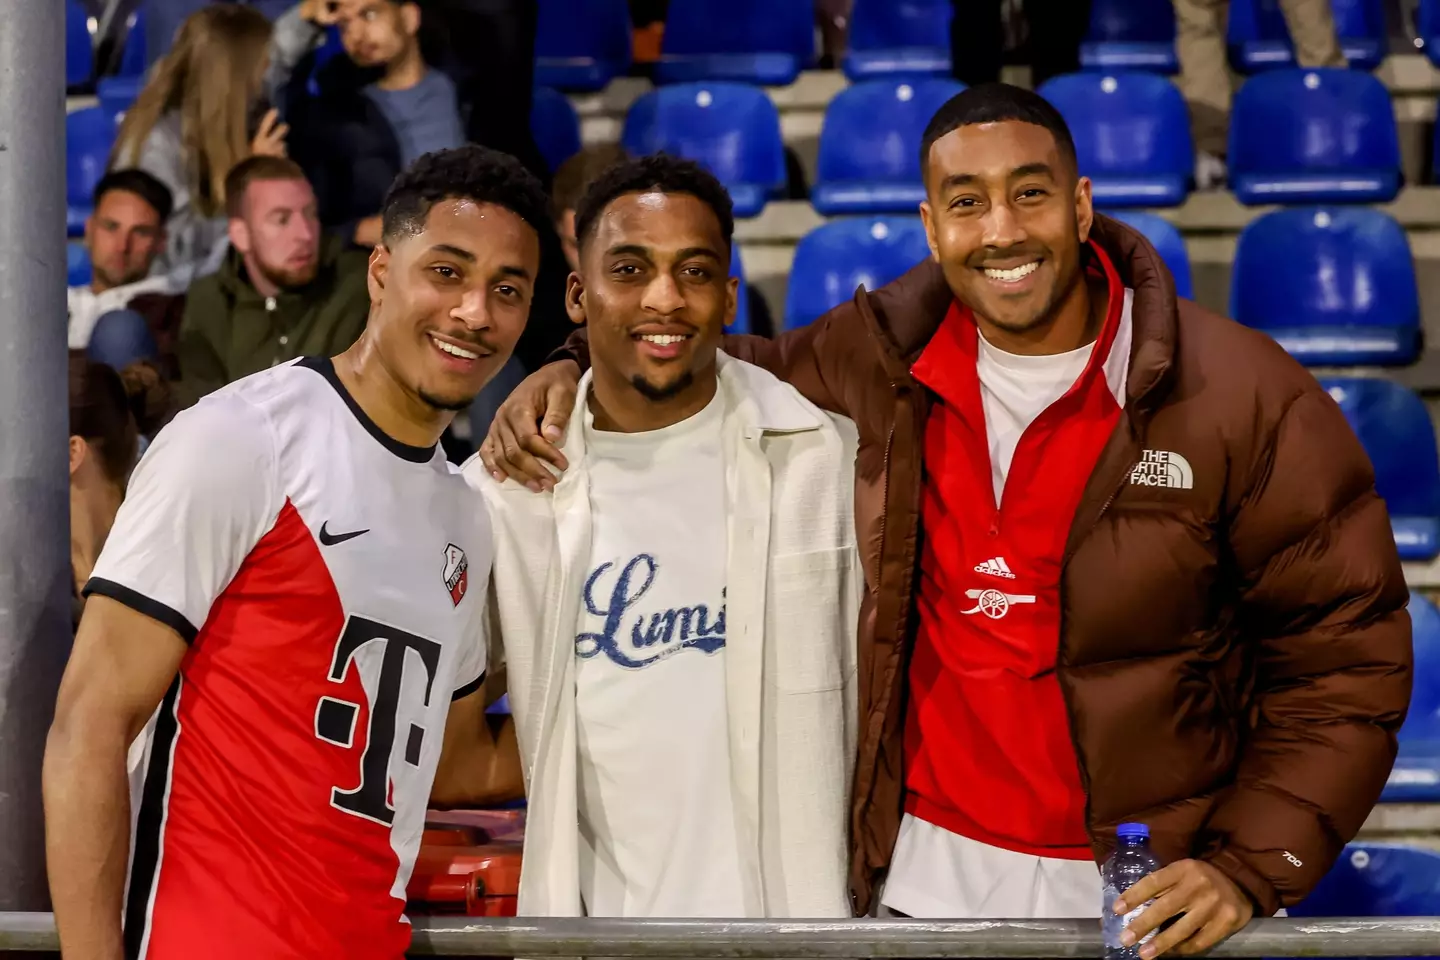 Jurrien Timber (centre) poses for a photo with older brother Dylan (left) and his agent.